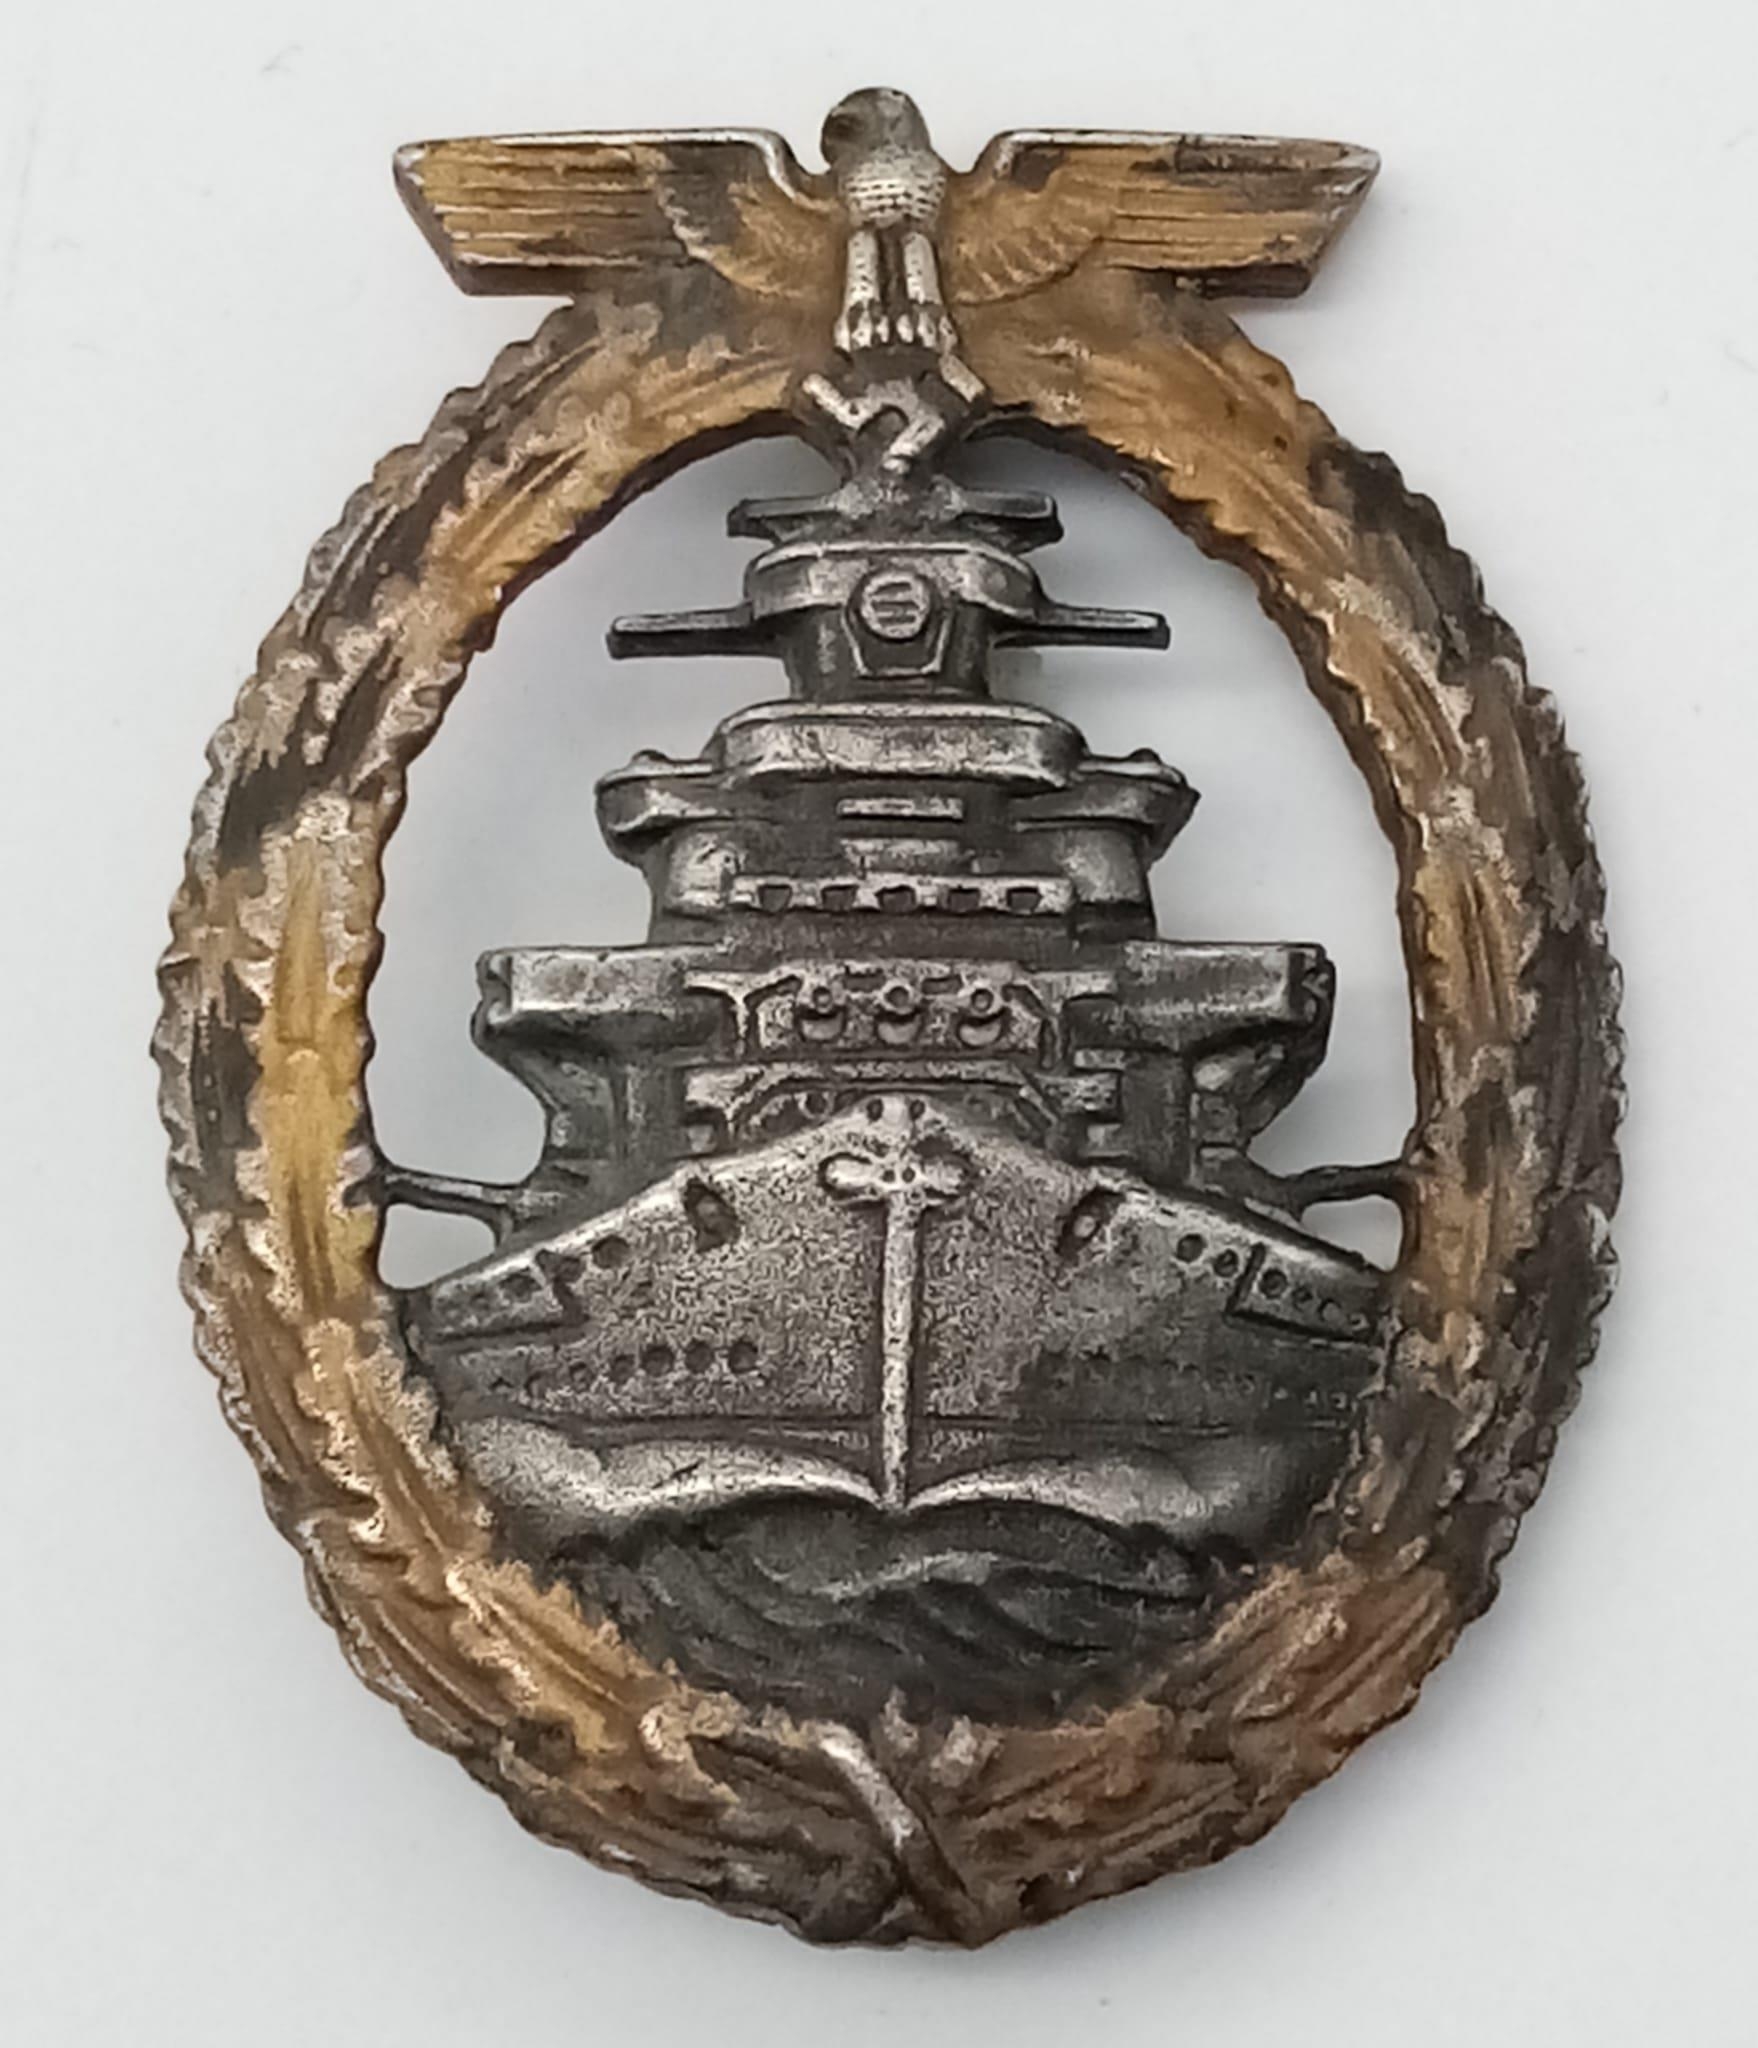 WW2 German High Seas Badge. Awarded for service to the crews of the High Seas Fleet consisting